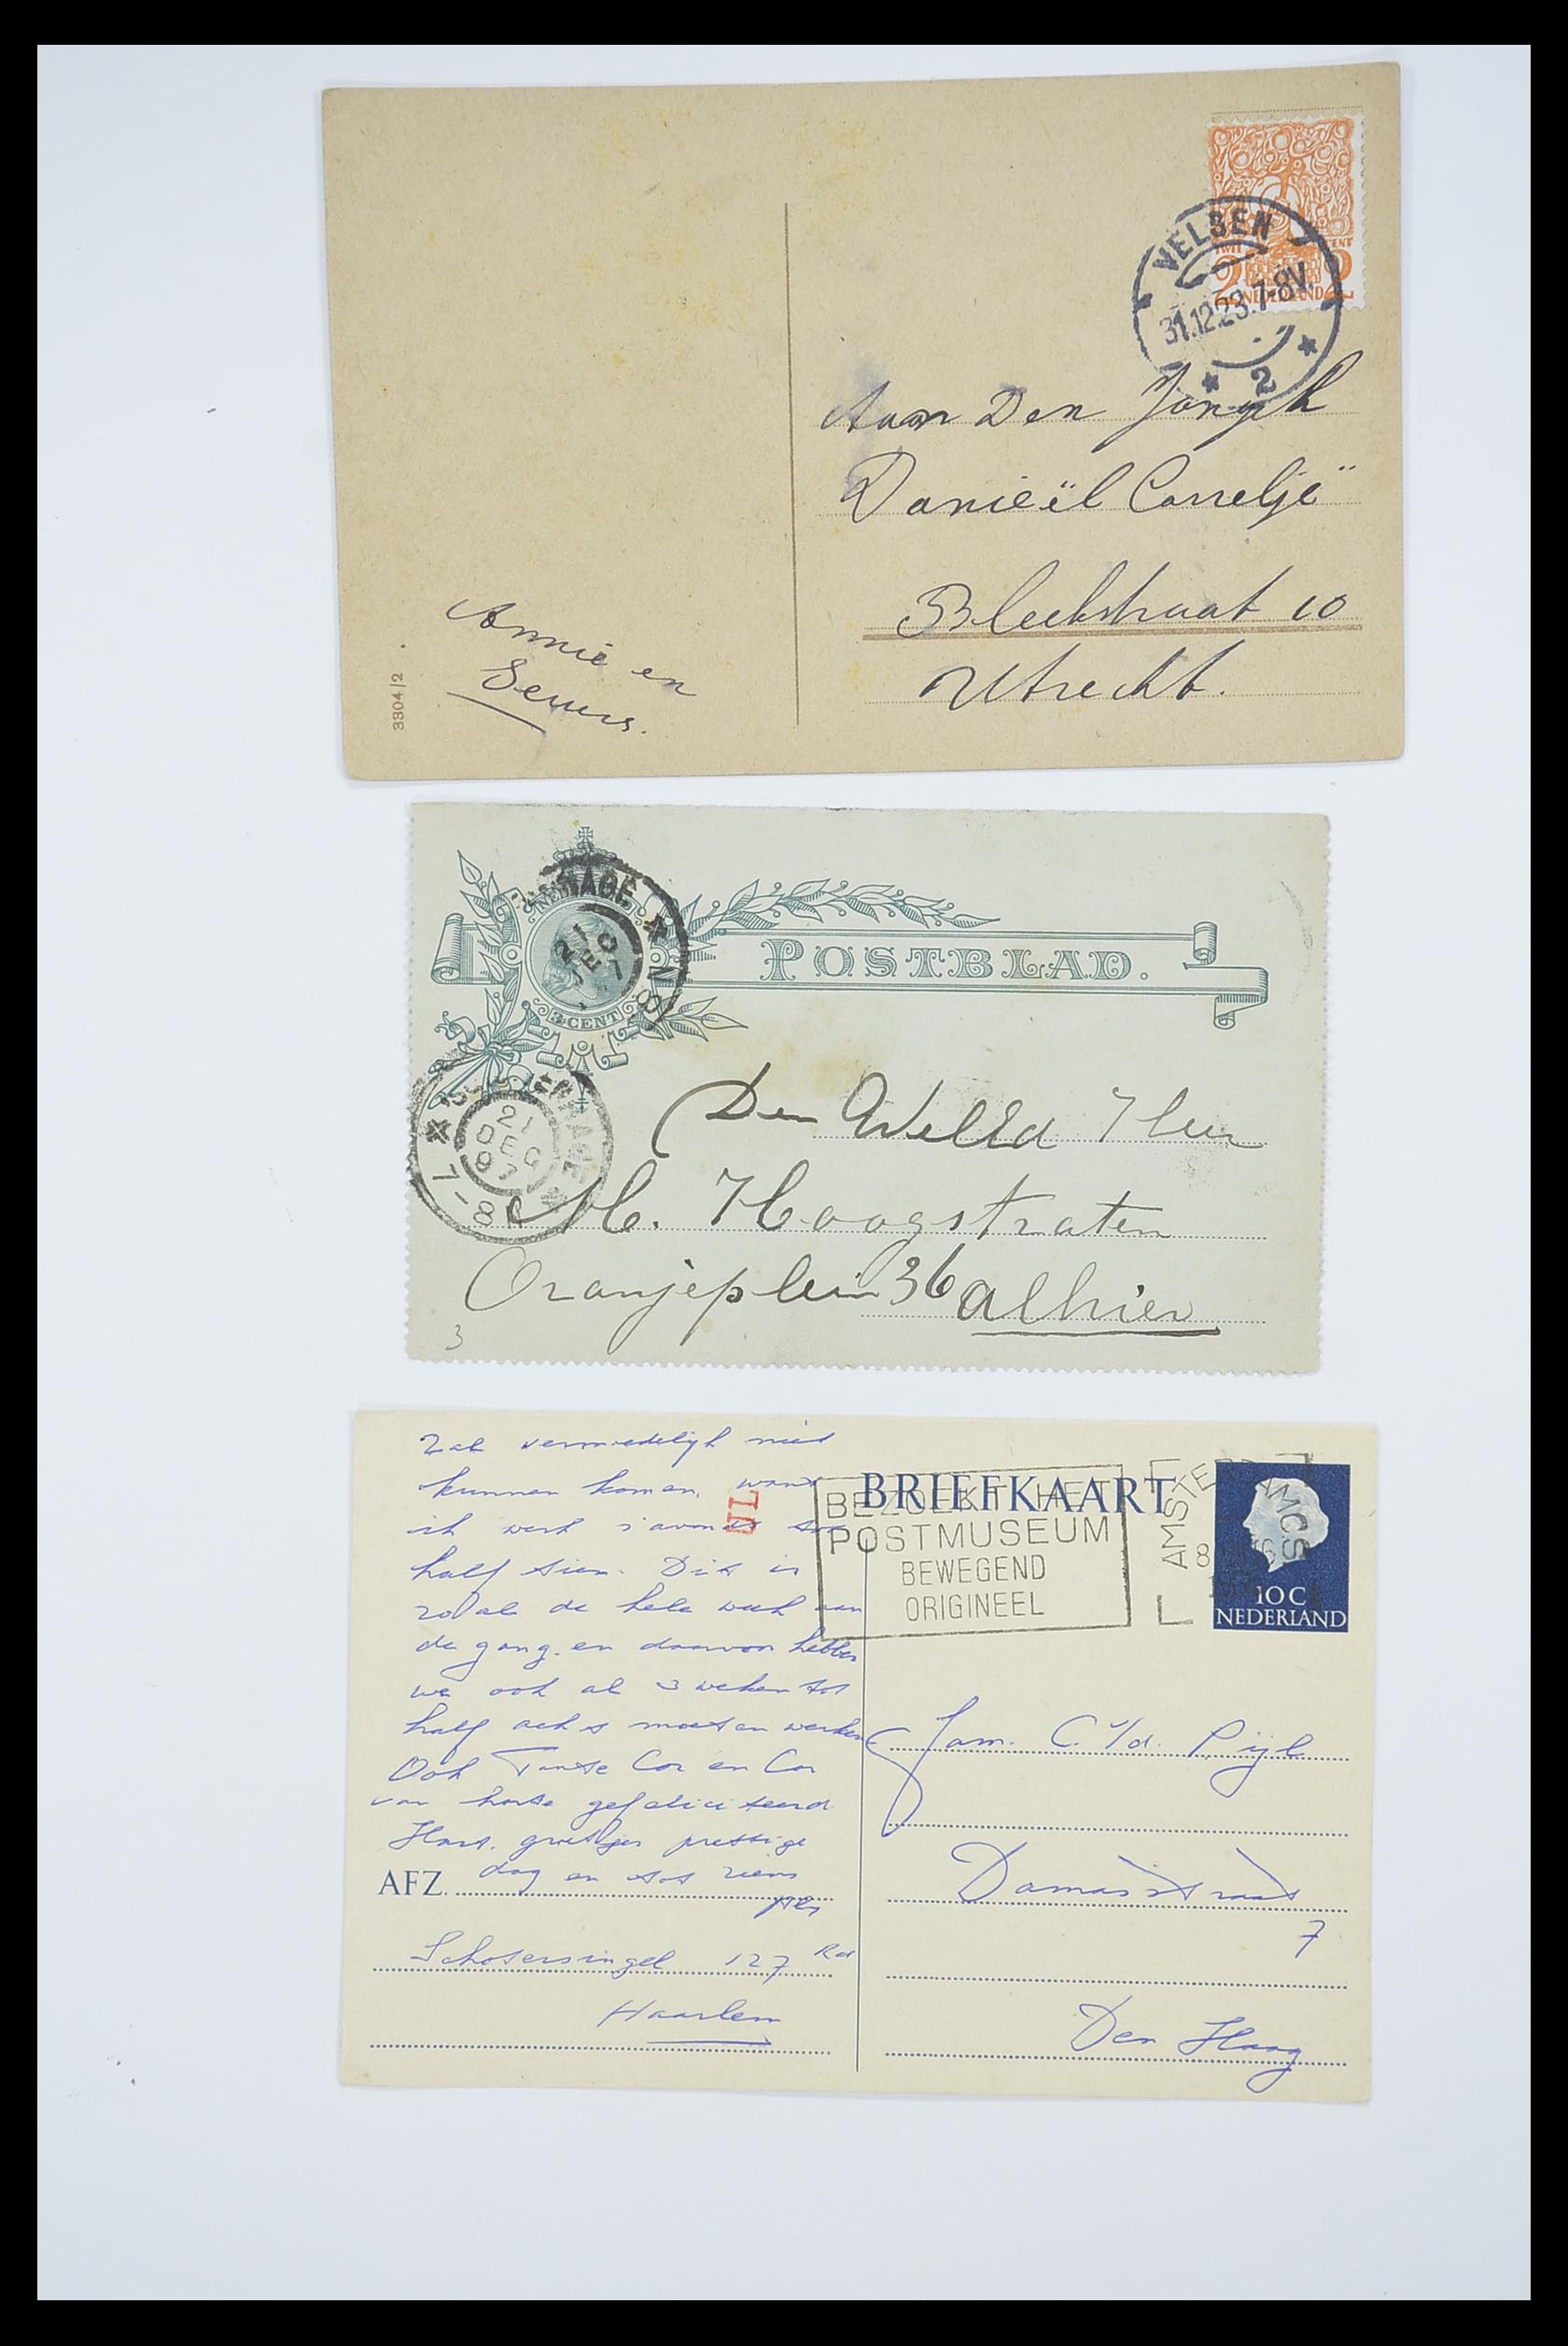 33536 011 - Stamp collection 33536 Netherlands covers 1800-1950.